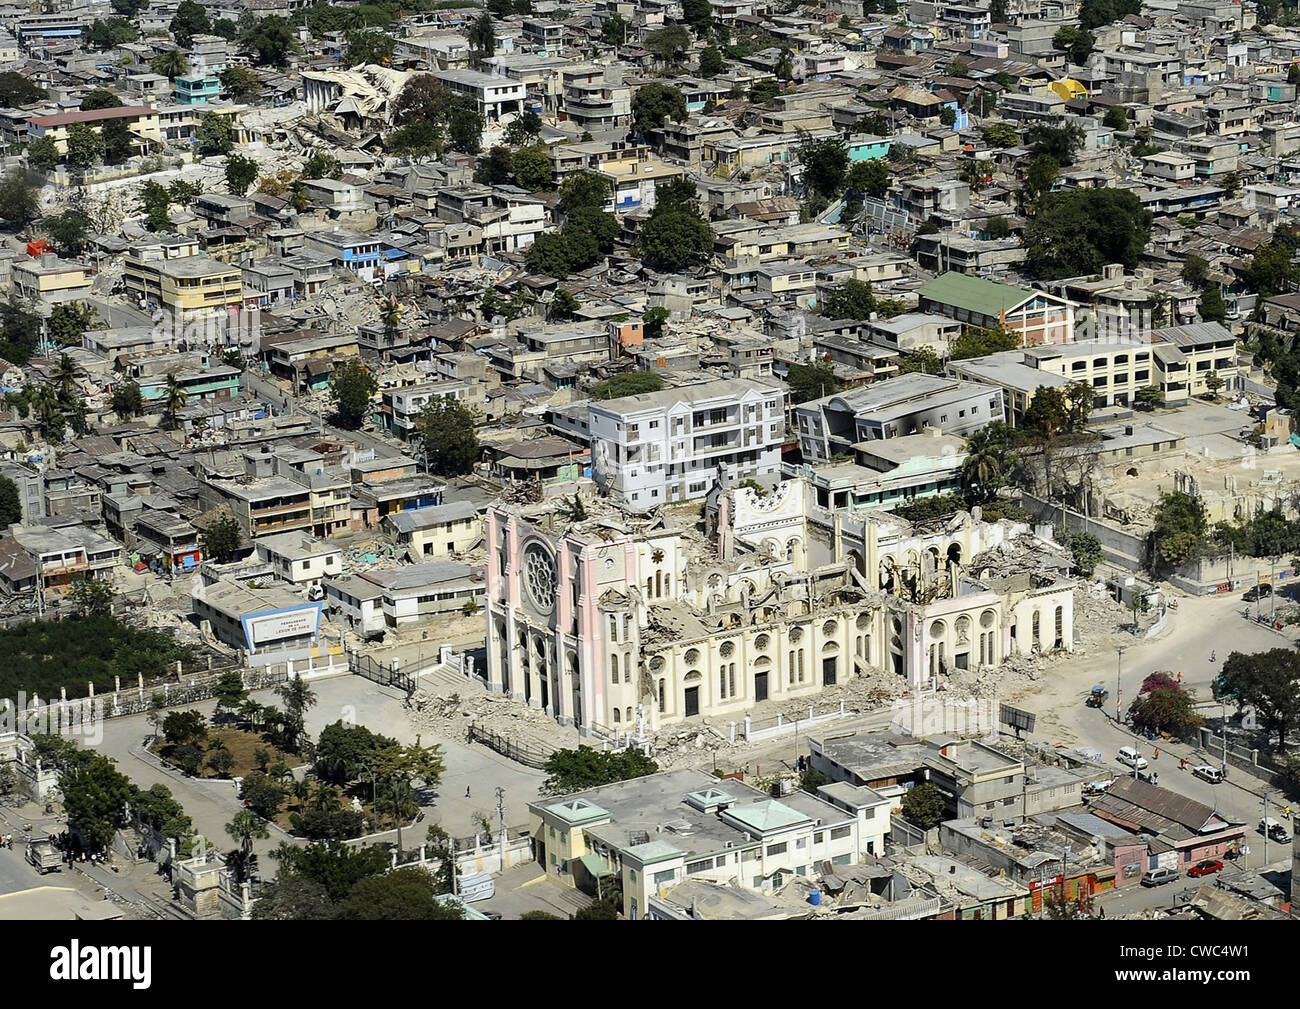 Ruins of the Roman Catholic cathedral in Port-au-Prince Haiti after the 7.0-magnitude earthquake on Jan. 12 2010. Stock Photo